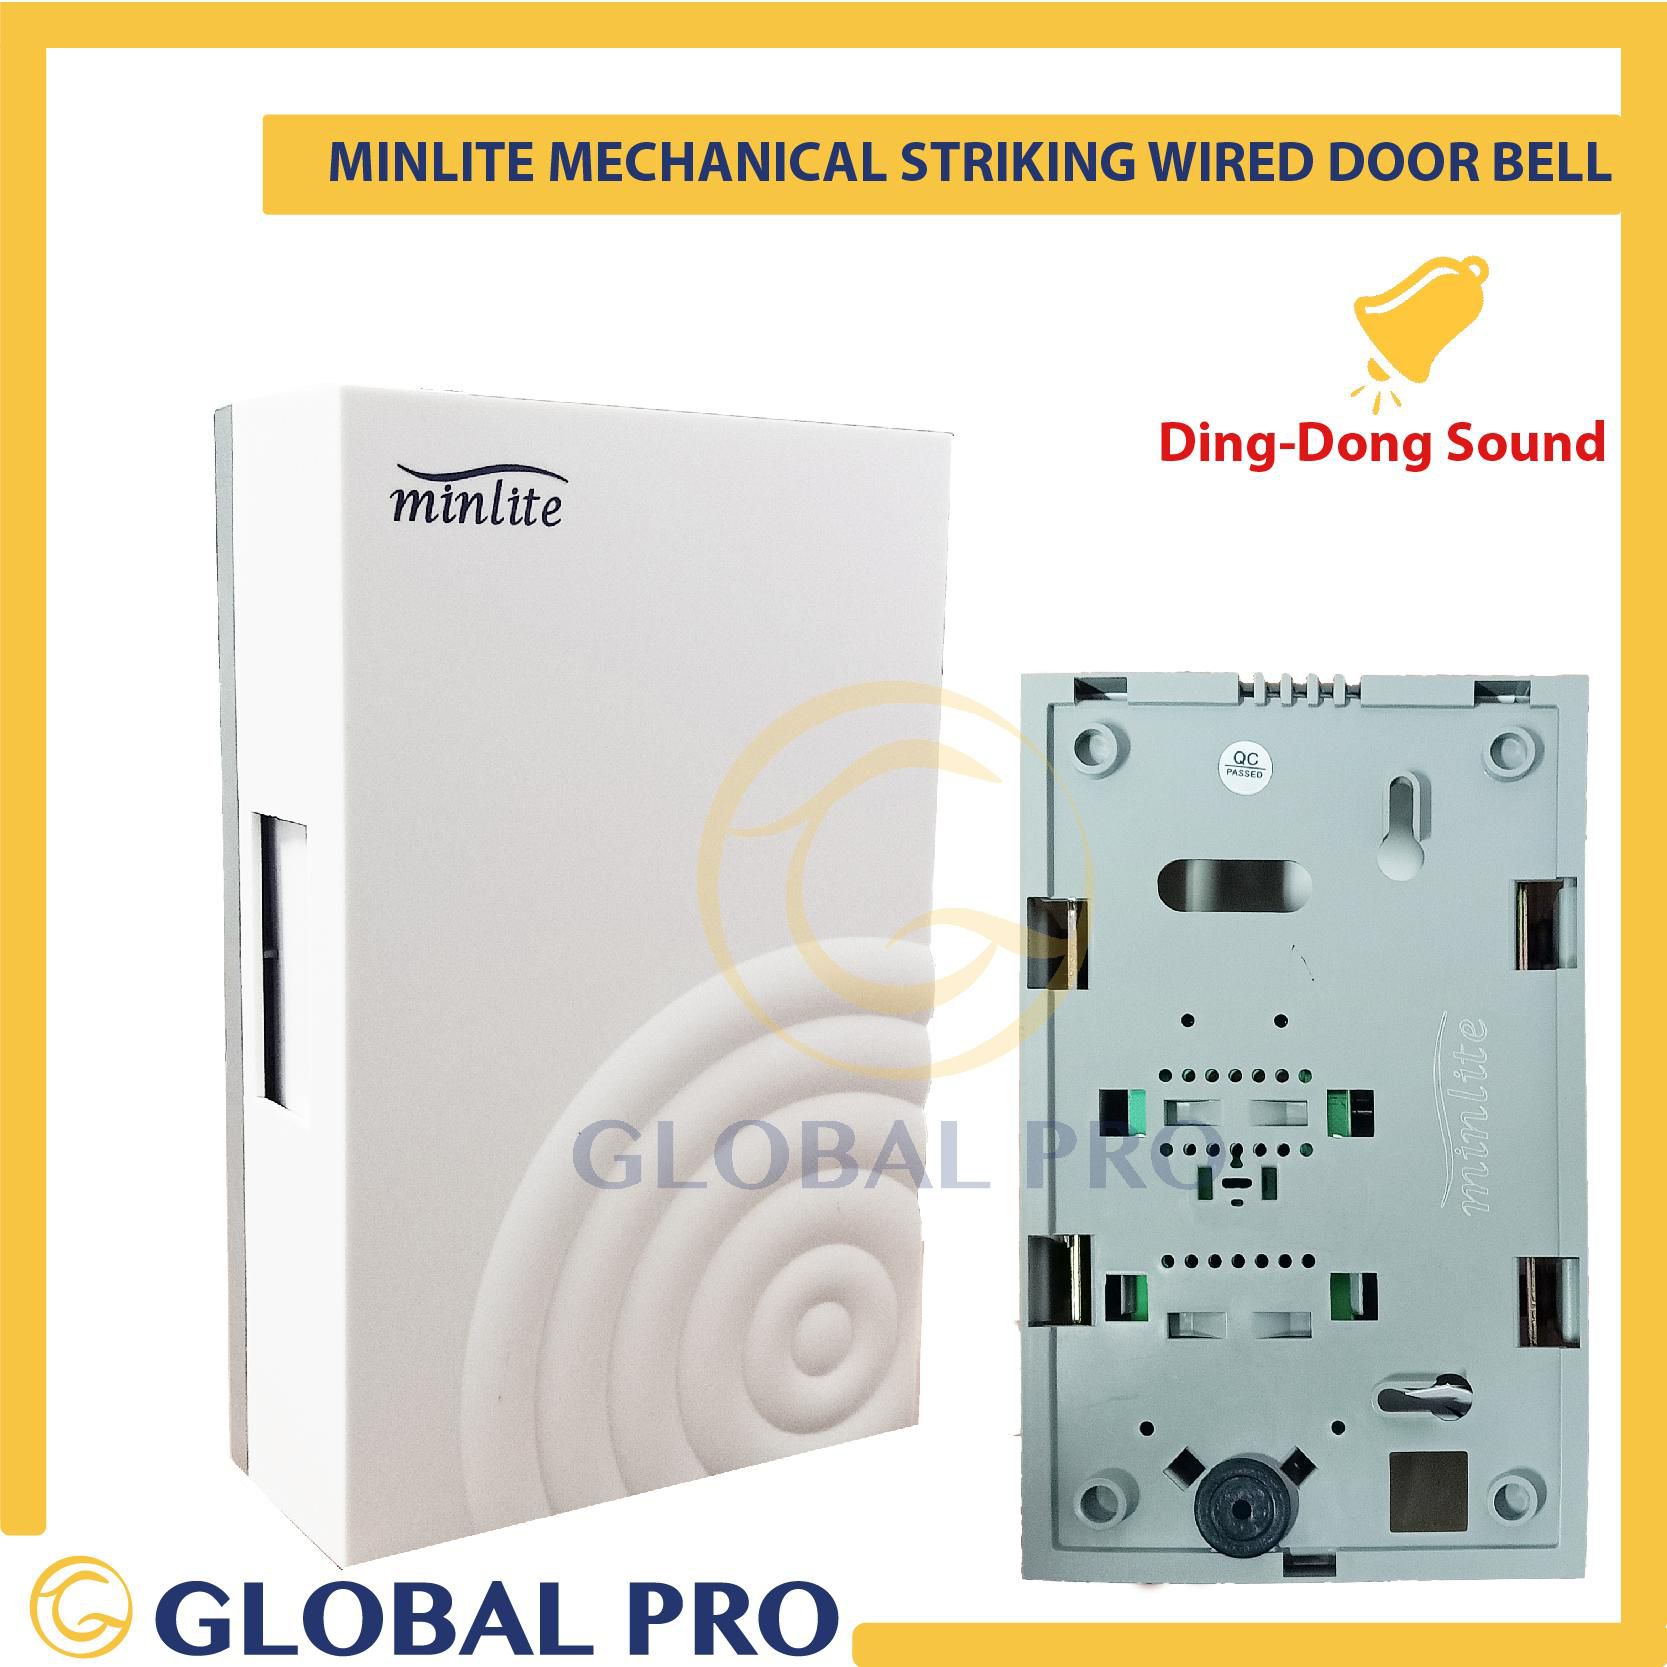 Globalproofficial Ding Dong Sound Minlite Mechanical Striking Wired Door Bell